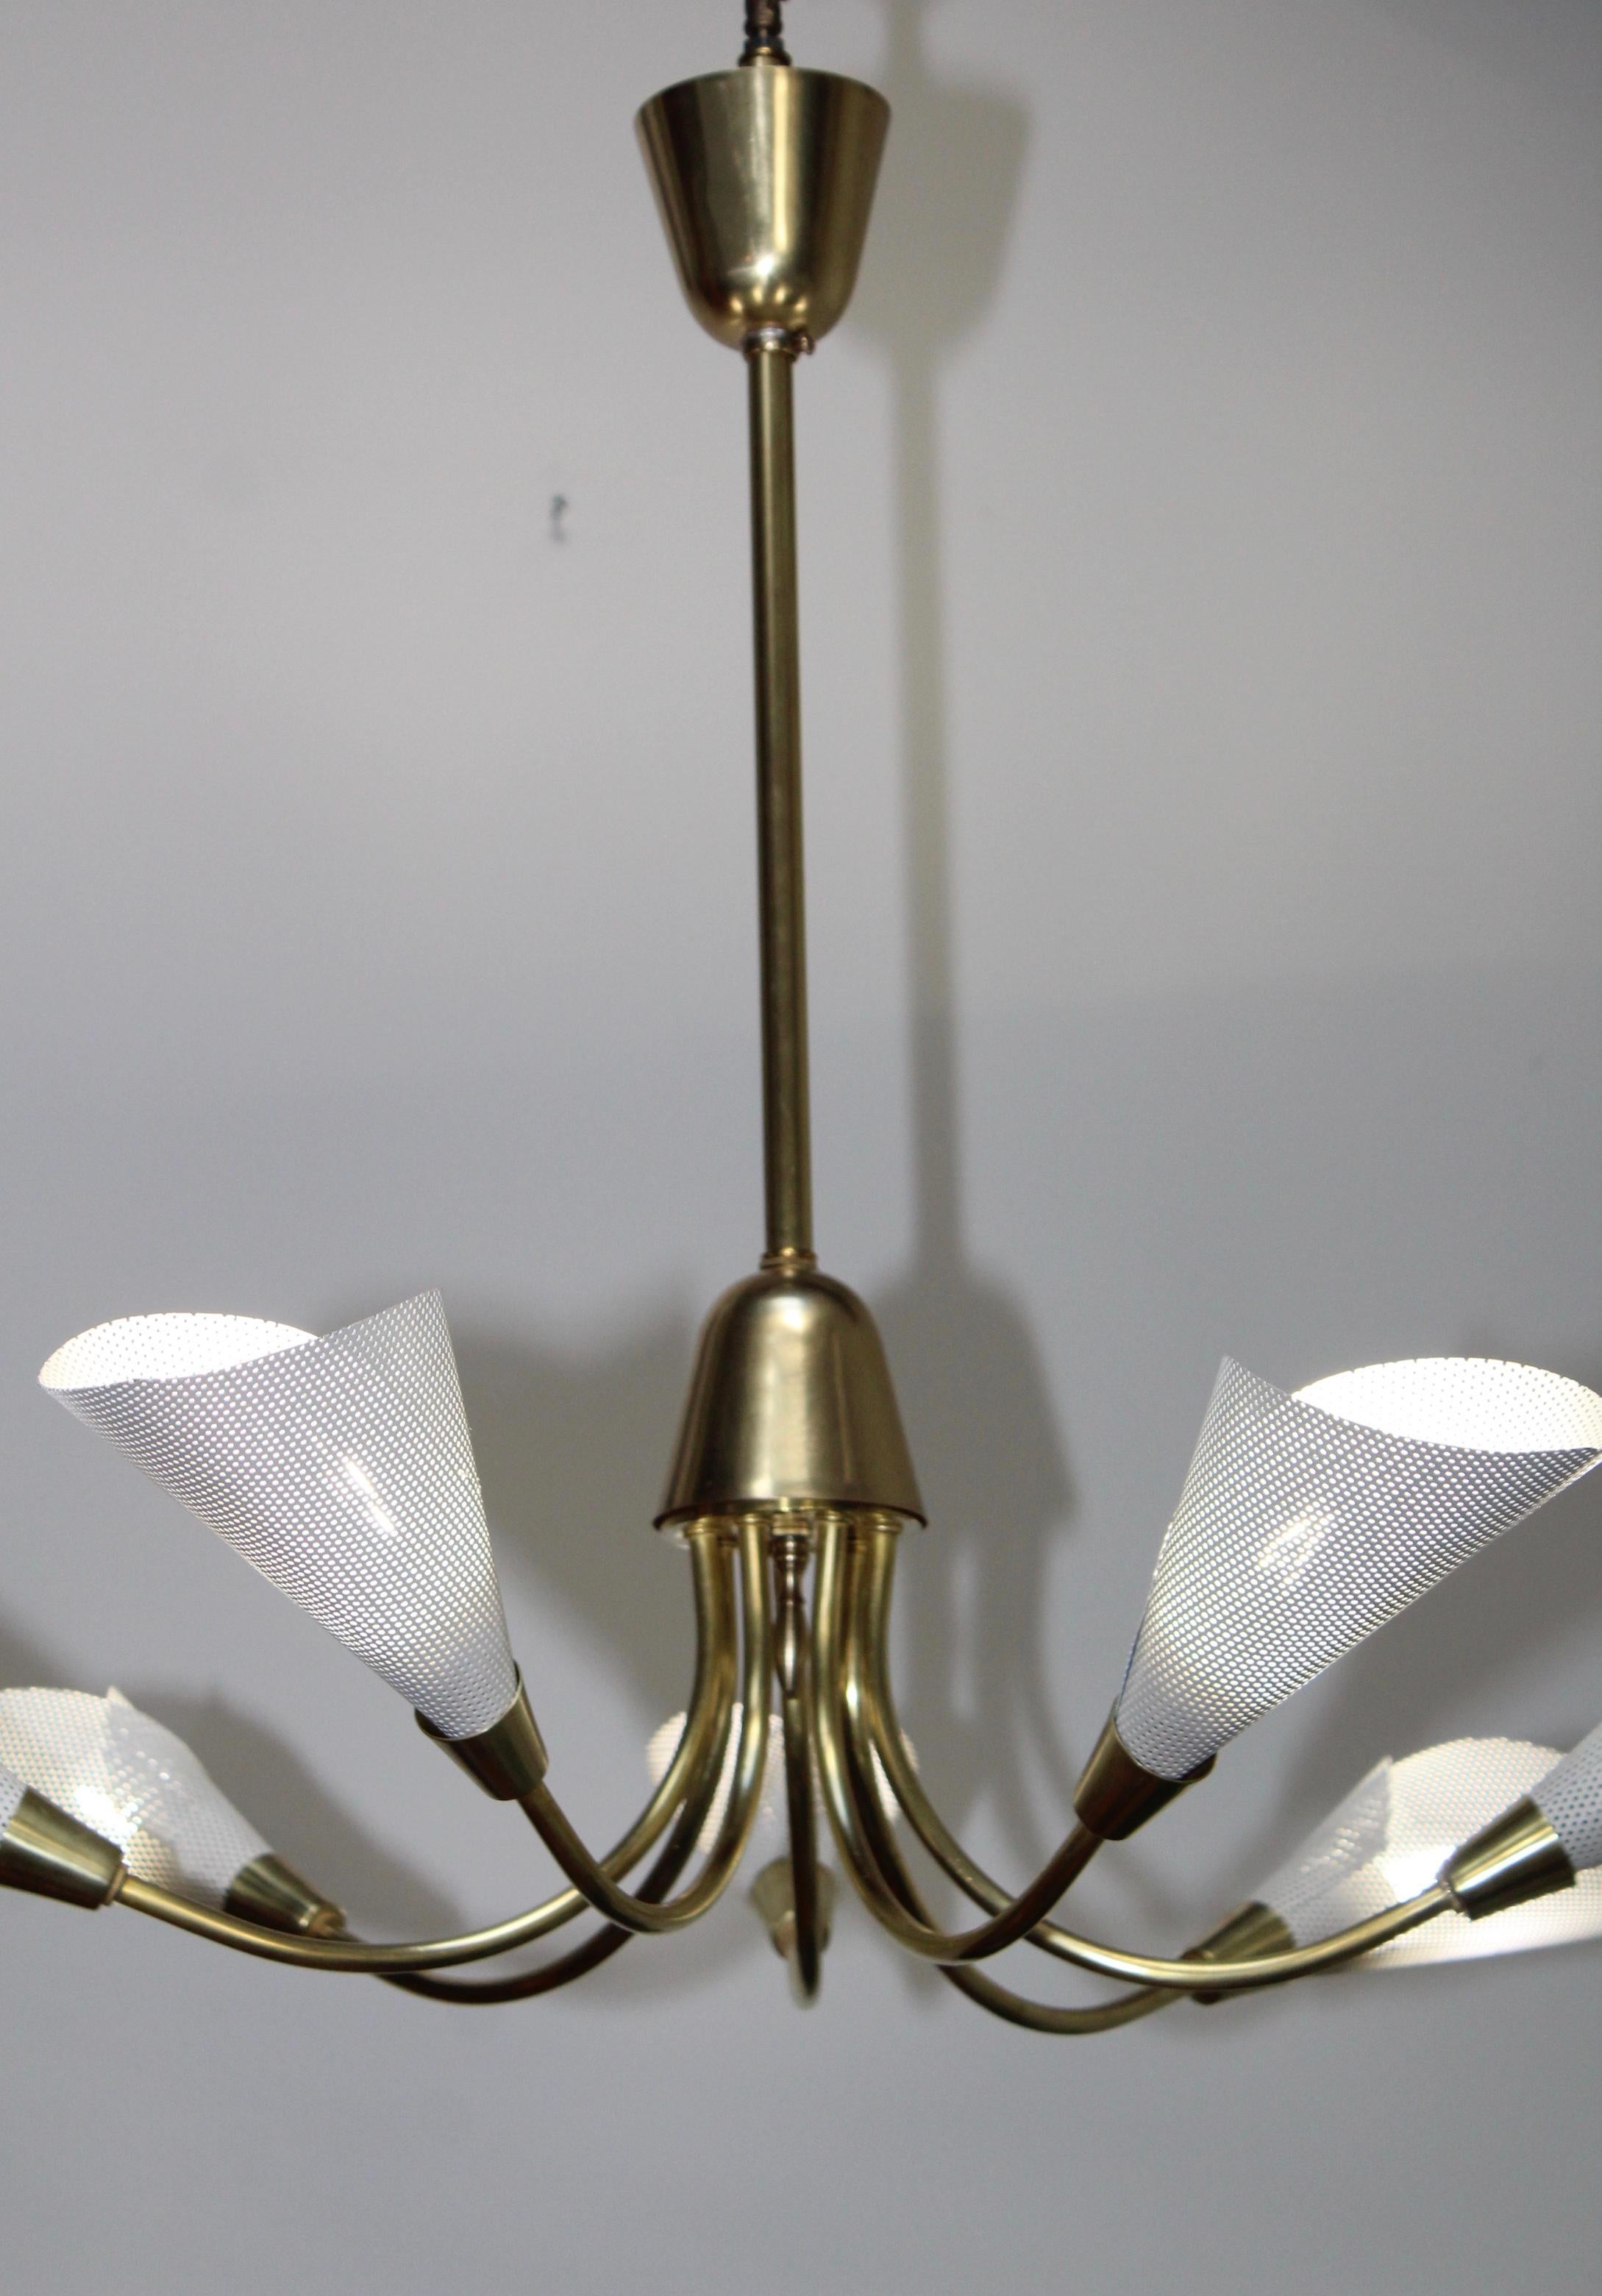 1960s Mid-Century Modern Perforated Shades and Brass French Chandelier For Sale 5